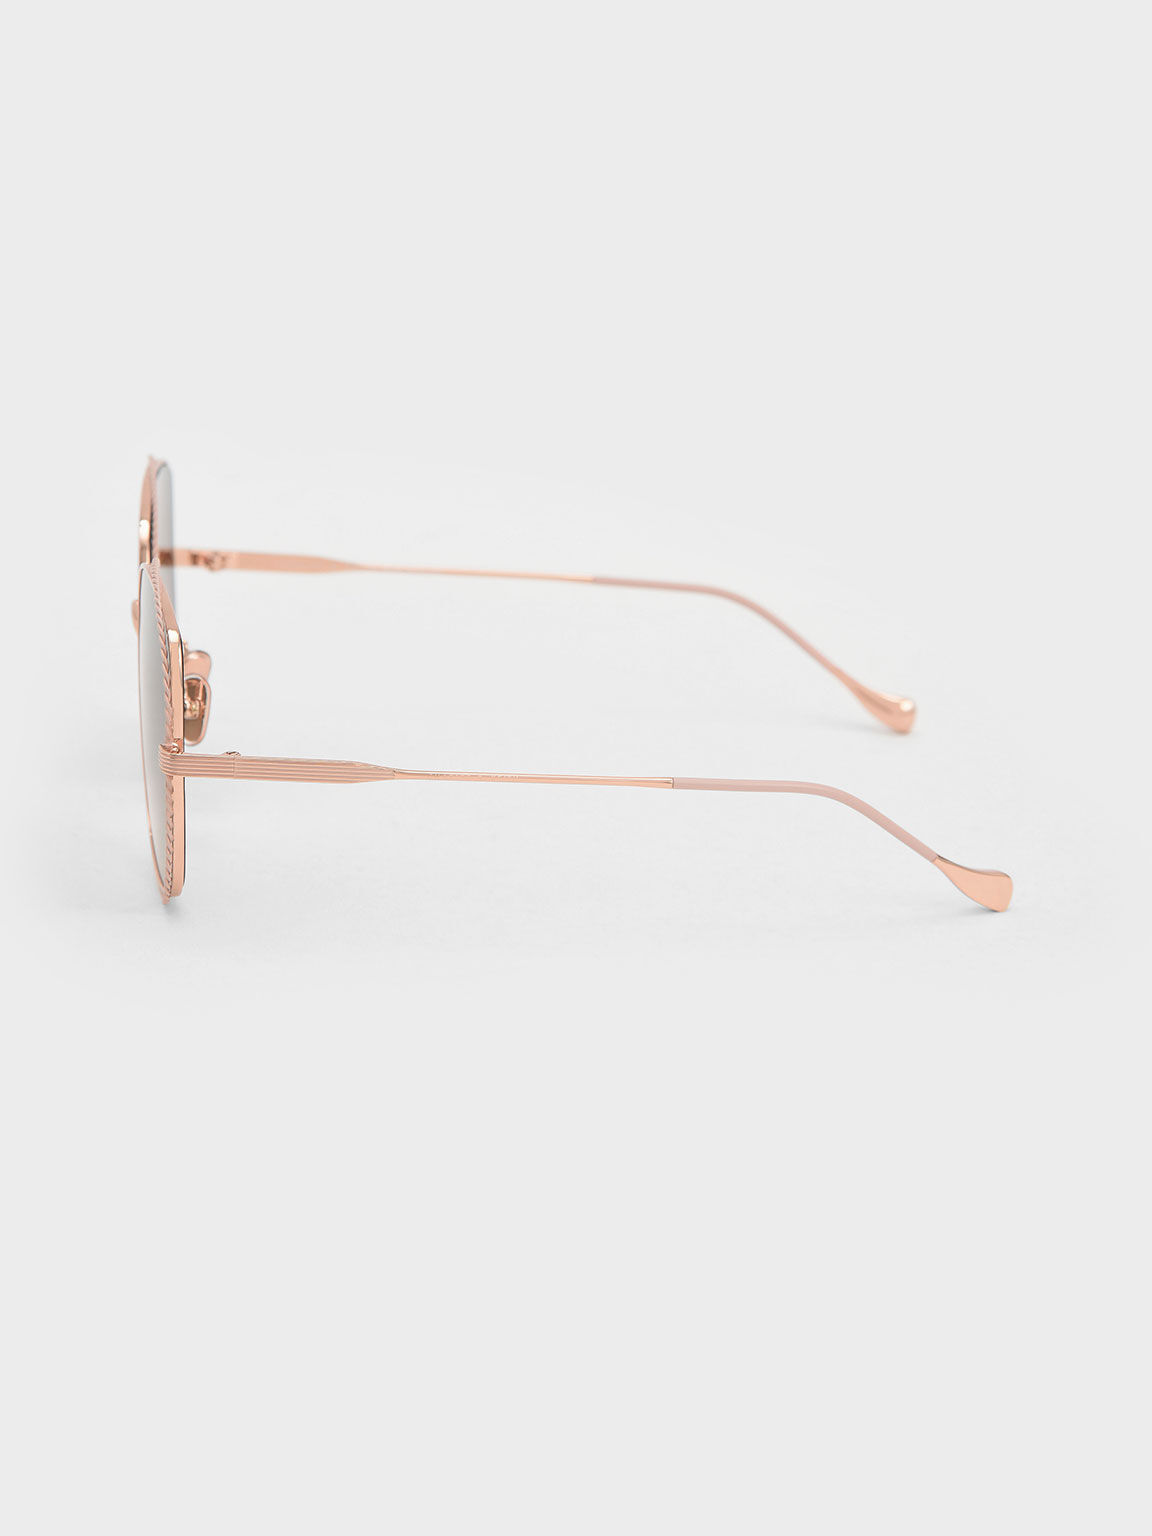 Cut-Out Butterfly Sunglasses, Pink, hi-res